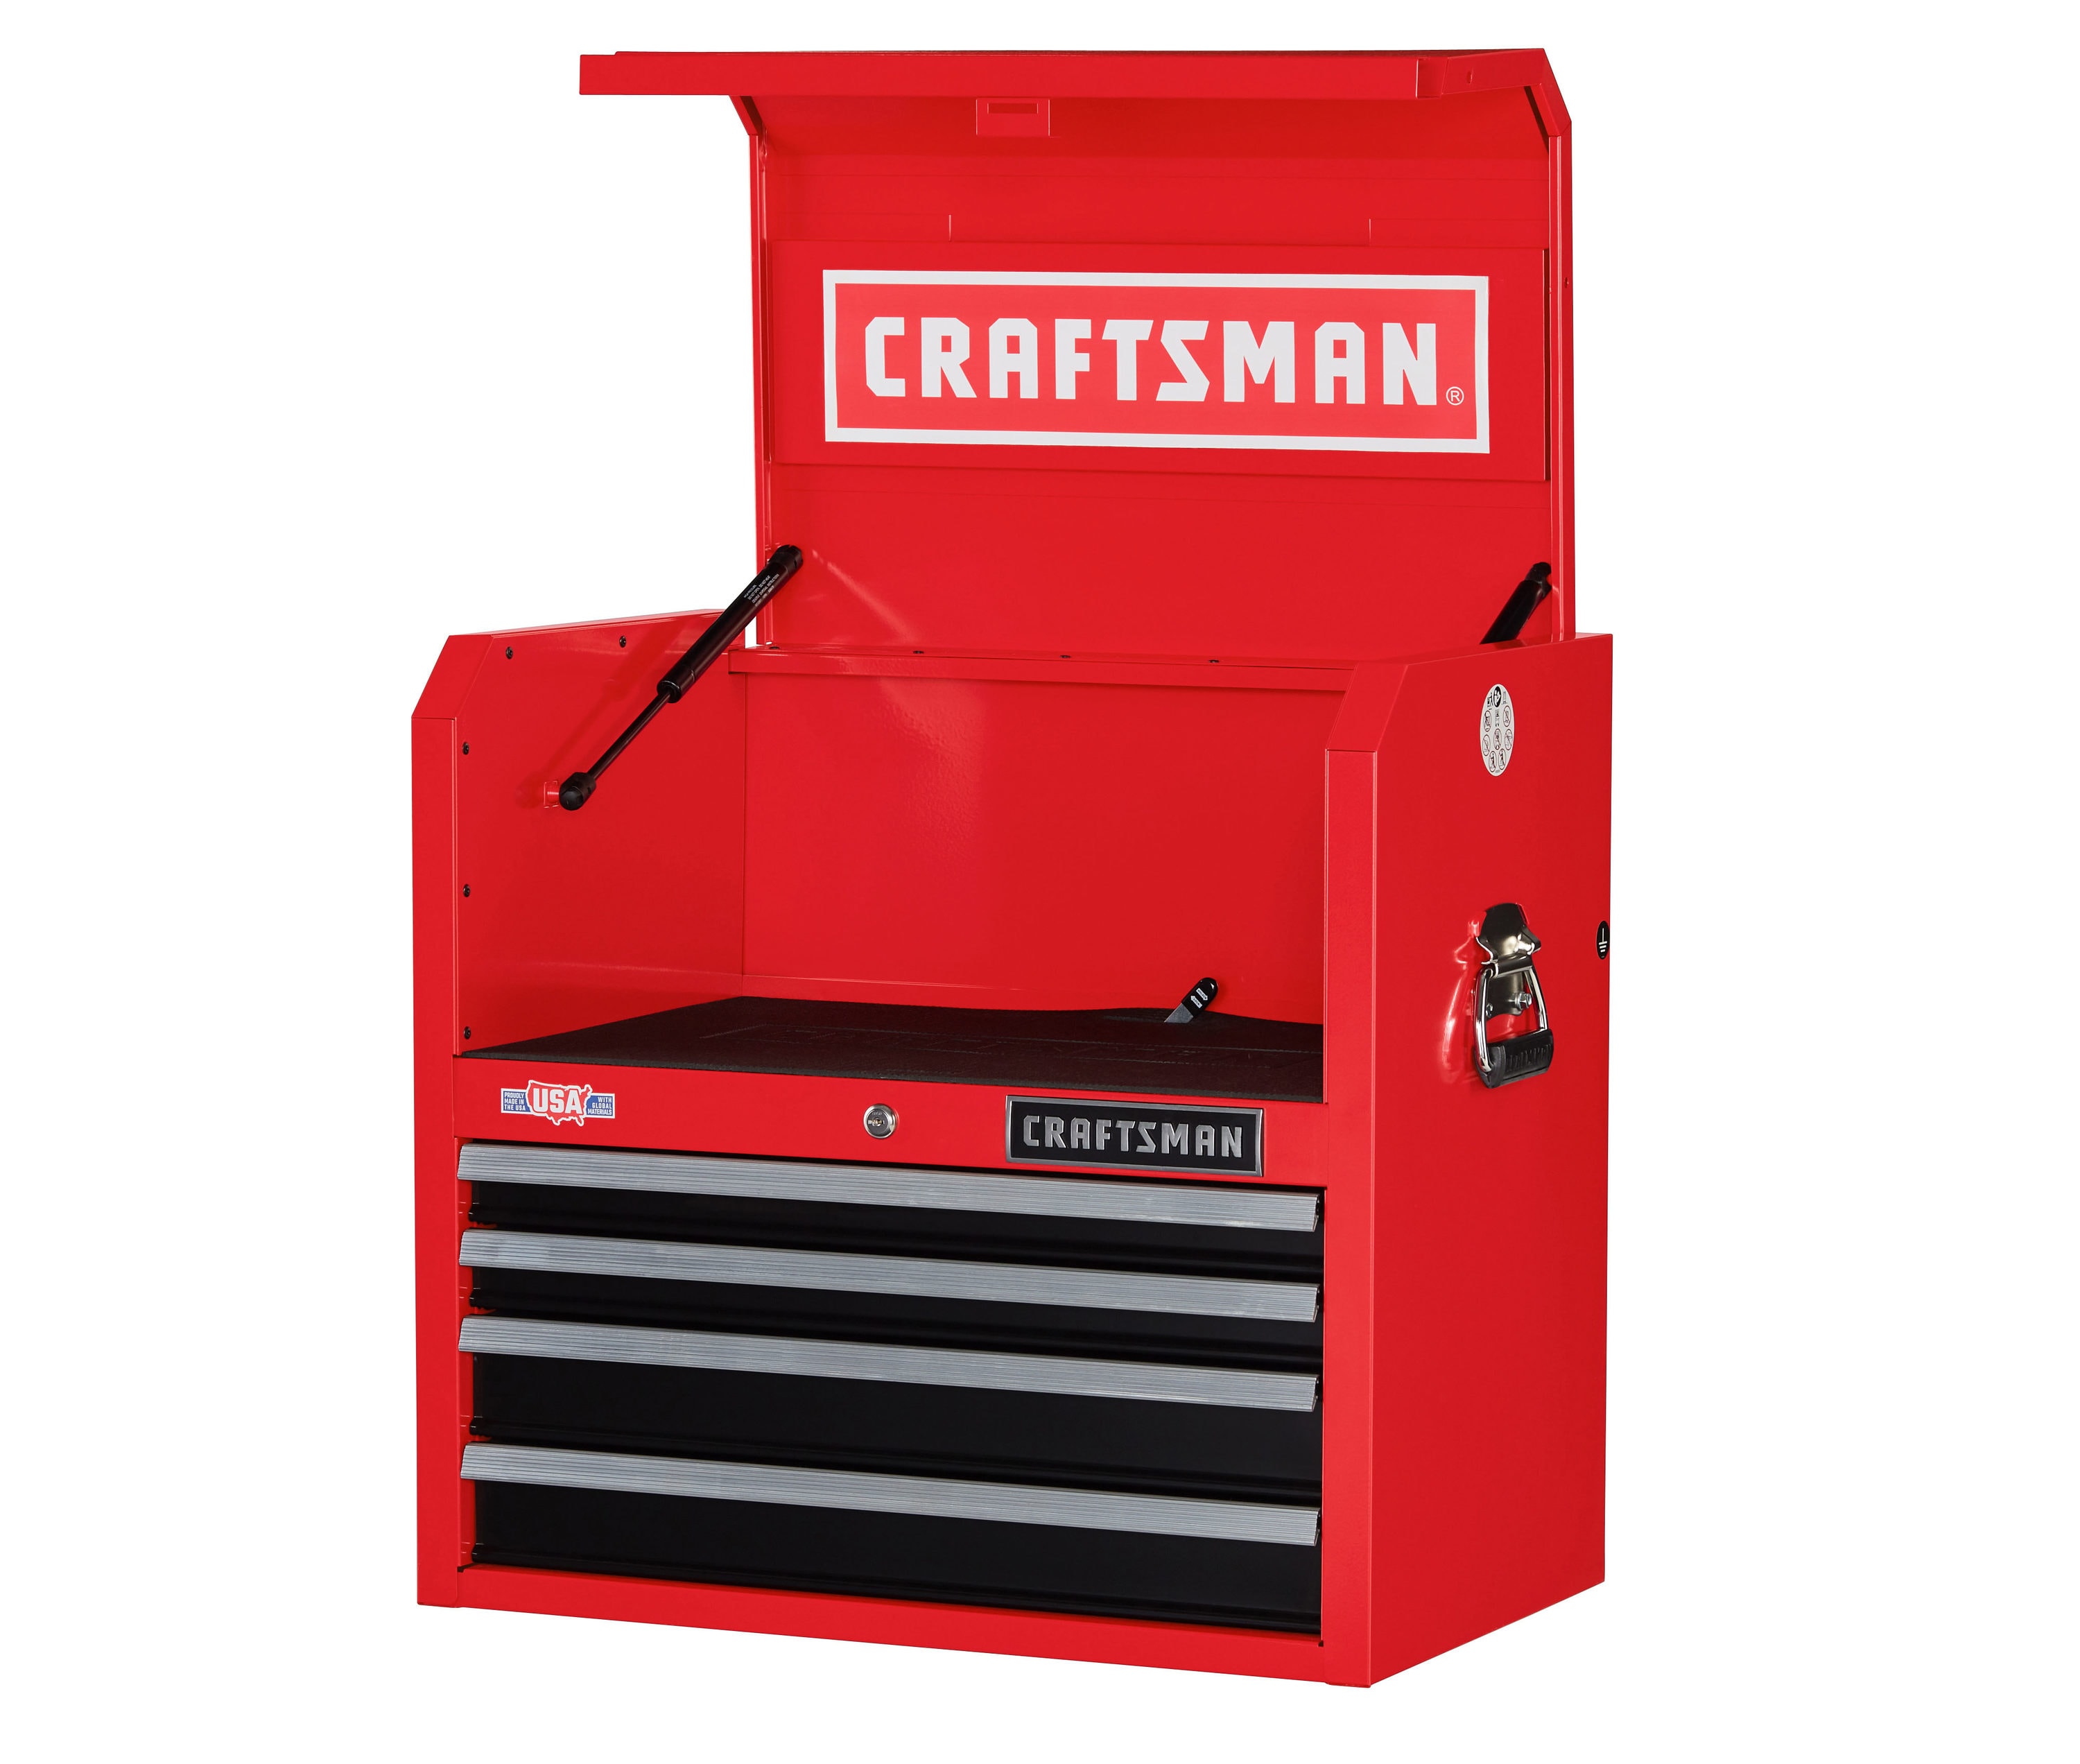 CRAFTSMAN 2000 Series 26in W x 24.5in H 4Drawer Steel Tool Chest